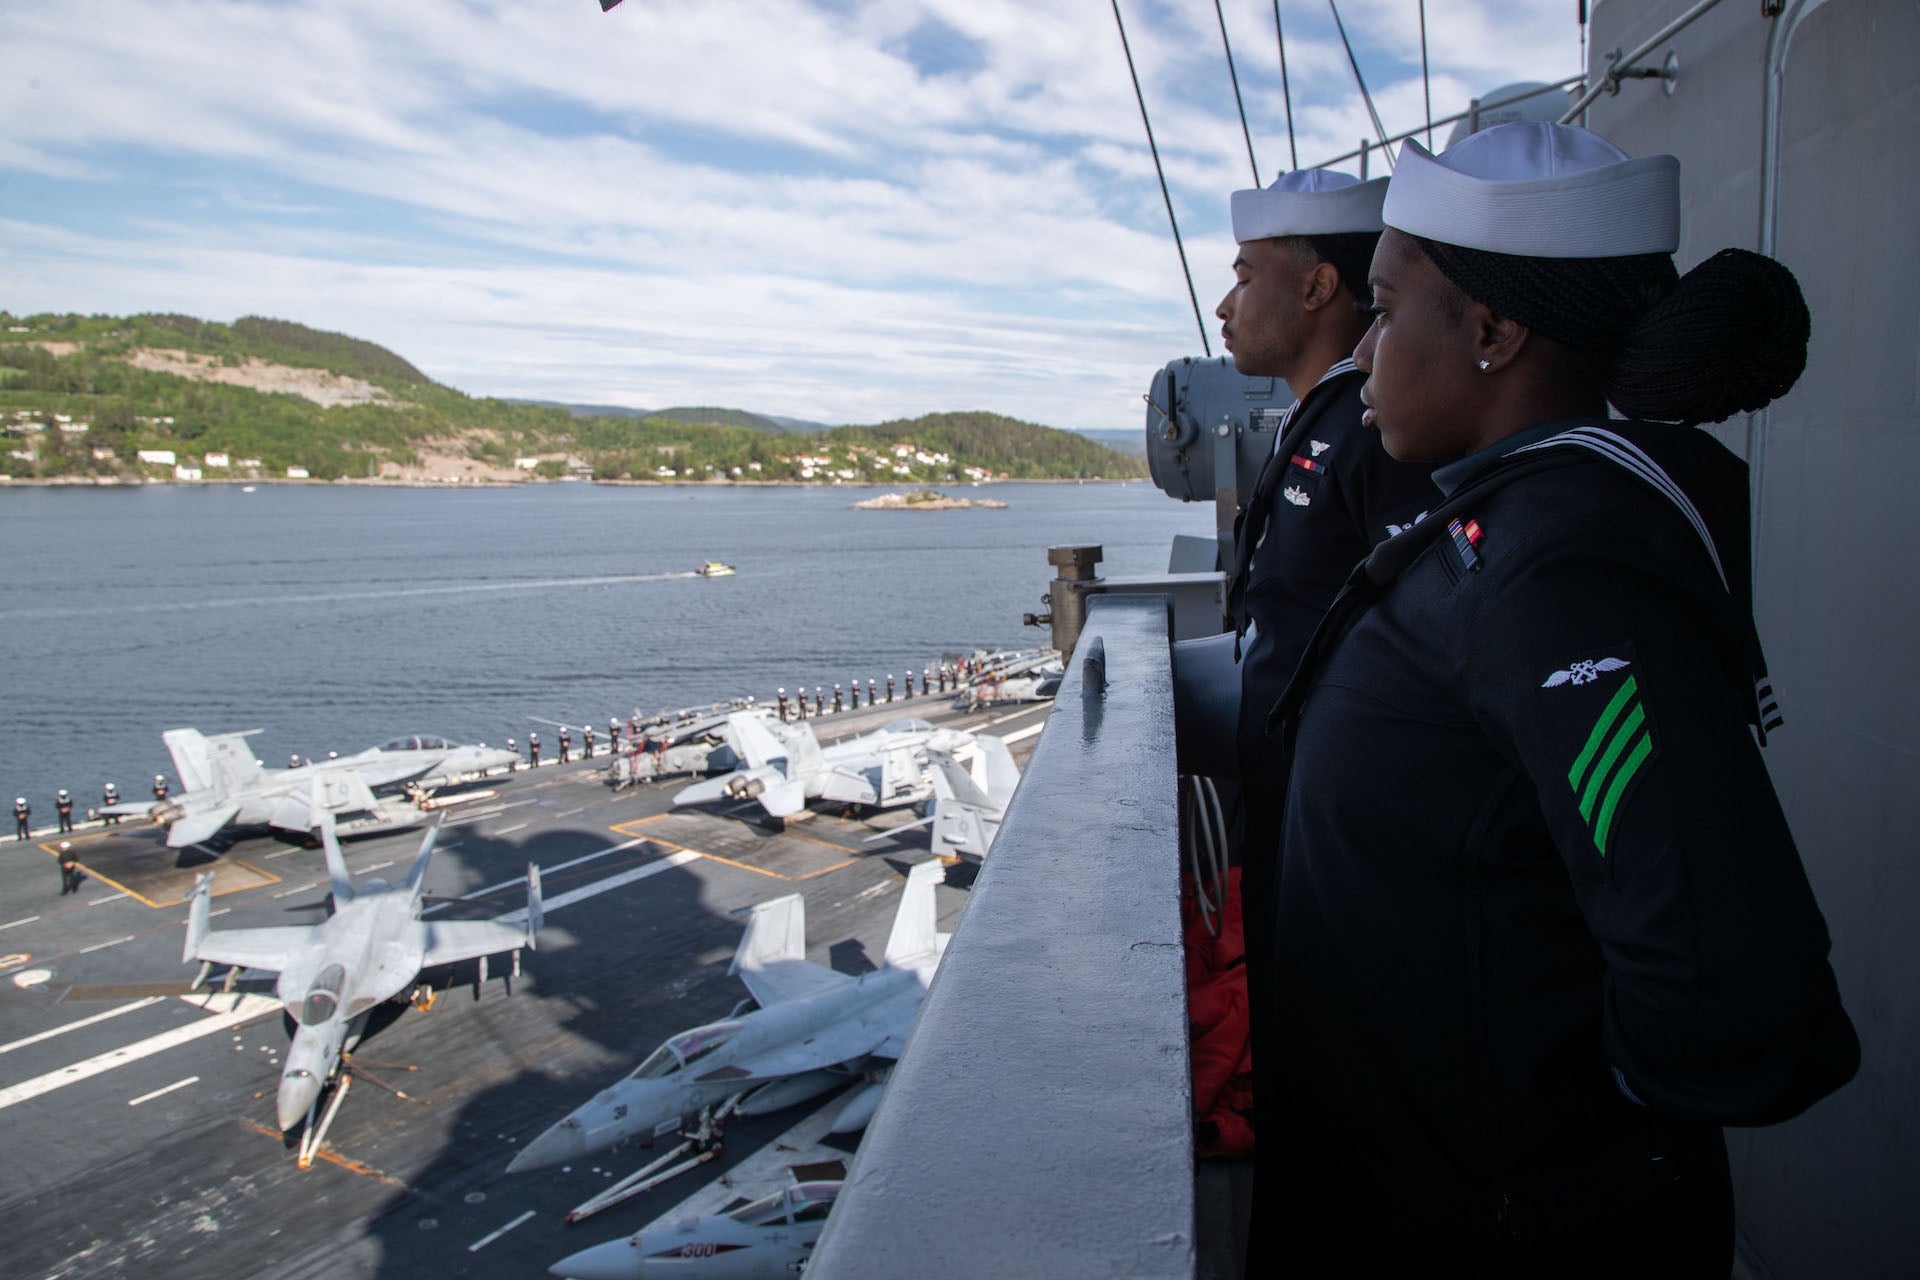 The flagship USS Gerald R. Ford (CVN 78) transits the Oslo fjord for its first port call in Oslo, Norway, May 24, 2023. Gerald R. Ford is the first U.S. aircraft carrier to pull into Norway in more than 65 years. Gerald R. Ford is the U.S. Navy’s newest and most advanced aircraft carrier, representing a generational leap in the in the U.S. Navy’s capacity to project power on a global scale. The Gerald R. Ford Strike Group is on a scheduled deployment in the U.S. Naval Forces Europe area of operations, employed by U.S. Sixth Fleet to defend U.S., allied, and partner interest. (US Navy Photo by Mass Communication Specialist 2nd Class Brian Glunt) Released